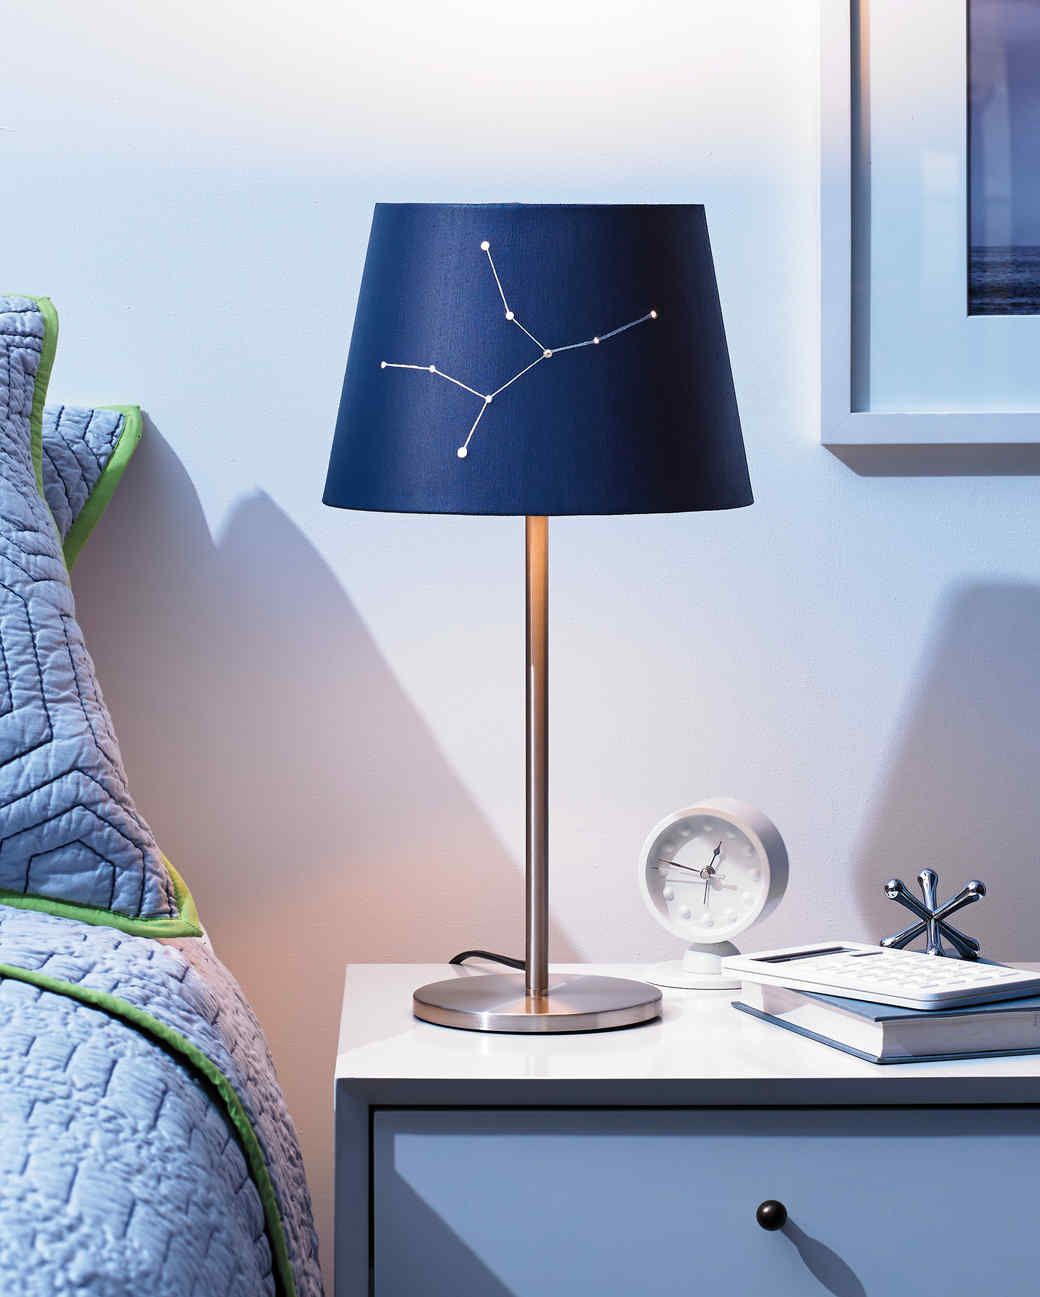 AFPANQZ Starry Galaxy Print Lamp Shape UNO Lampshade Living Room Decoration for Floor Lamp Table Lamp Shades Drum for Women Mens Bedroom 11.2 x 6.7 Navy Blue 